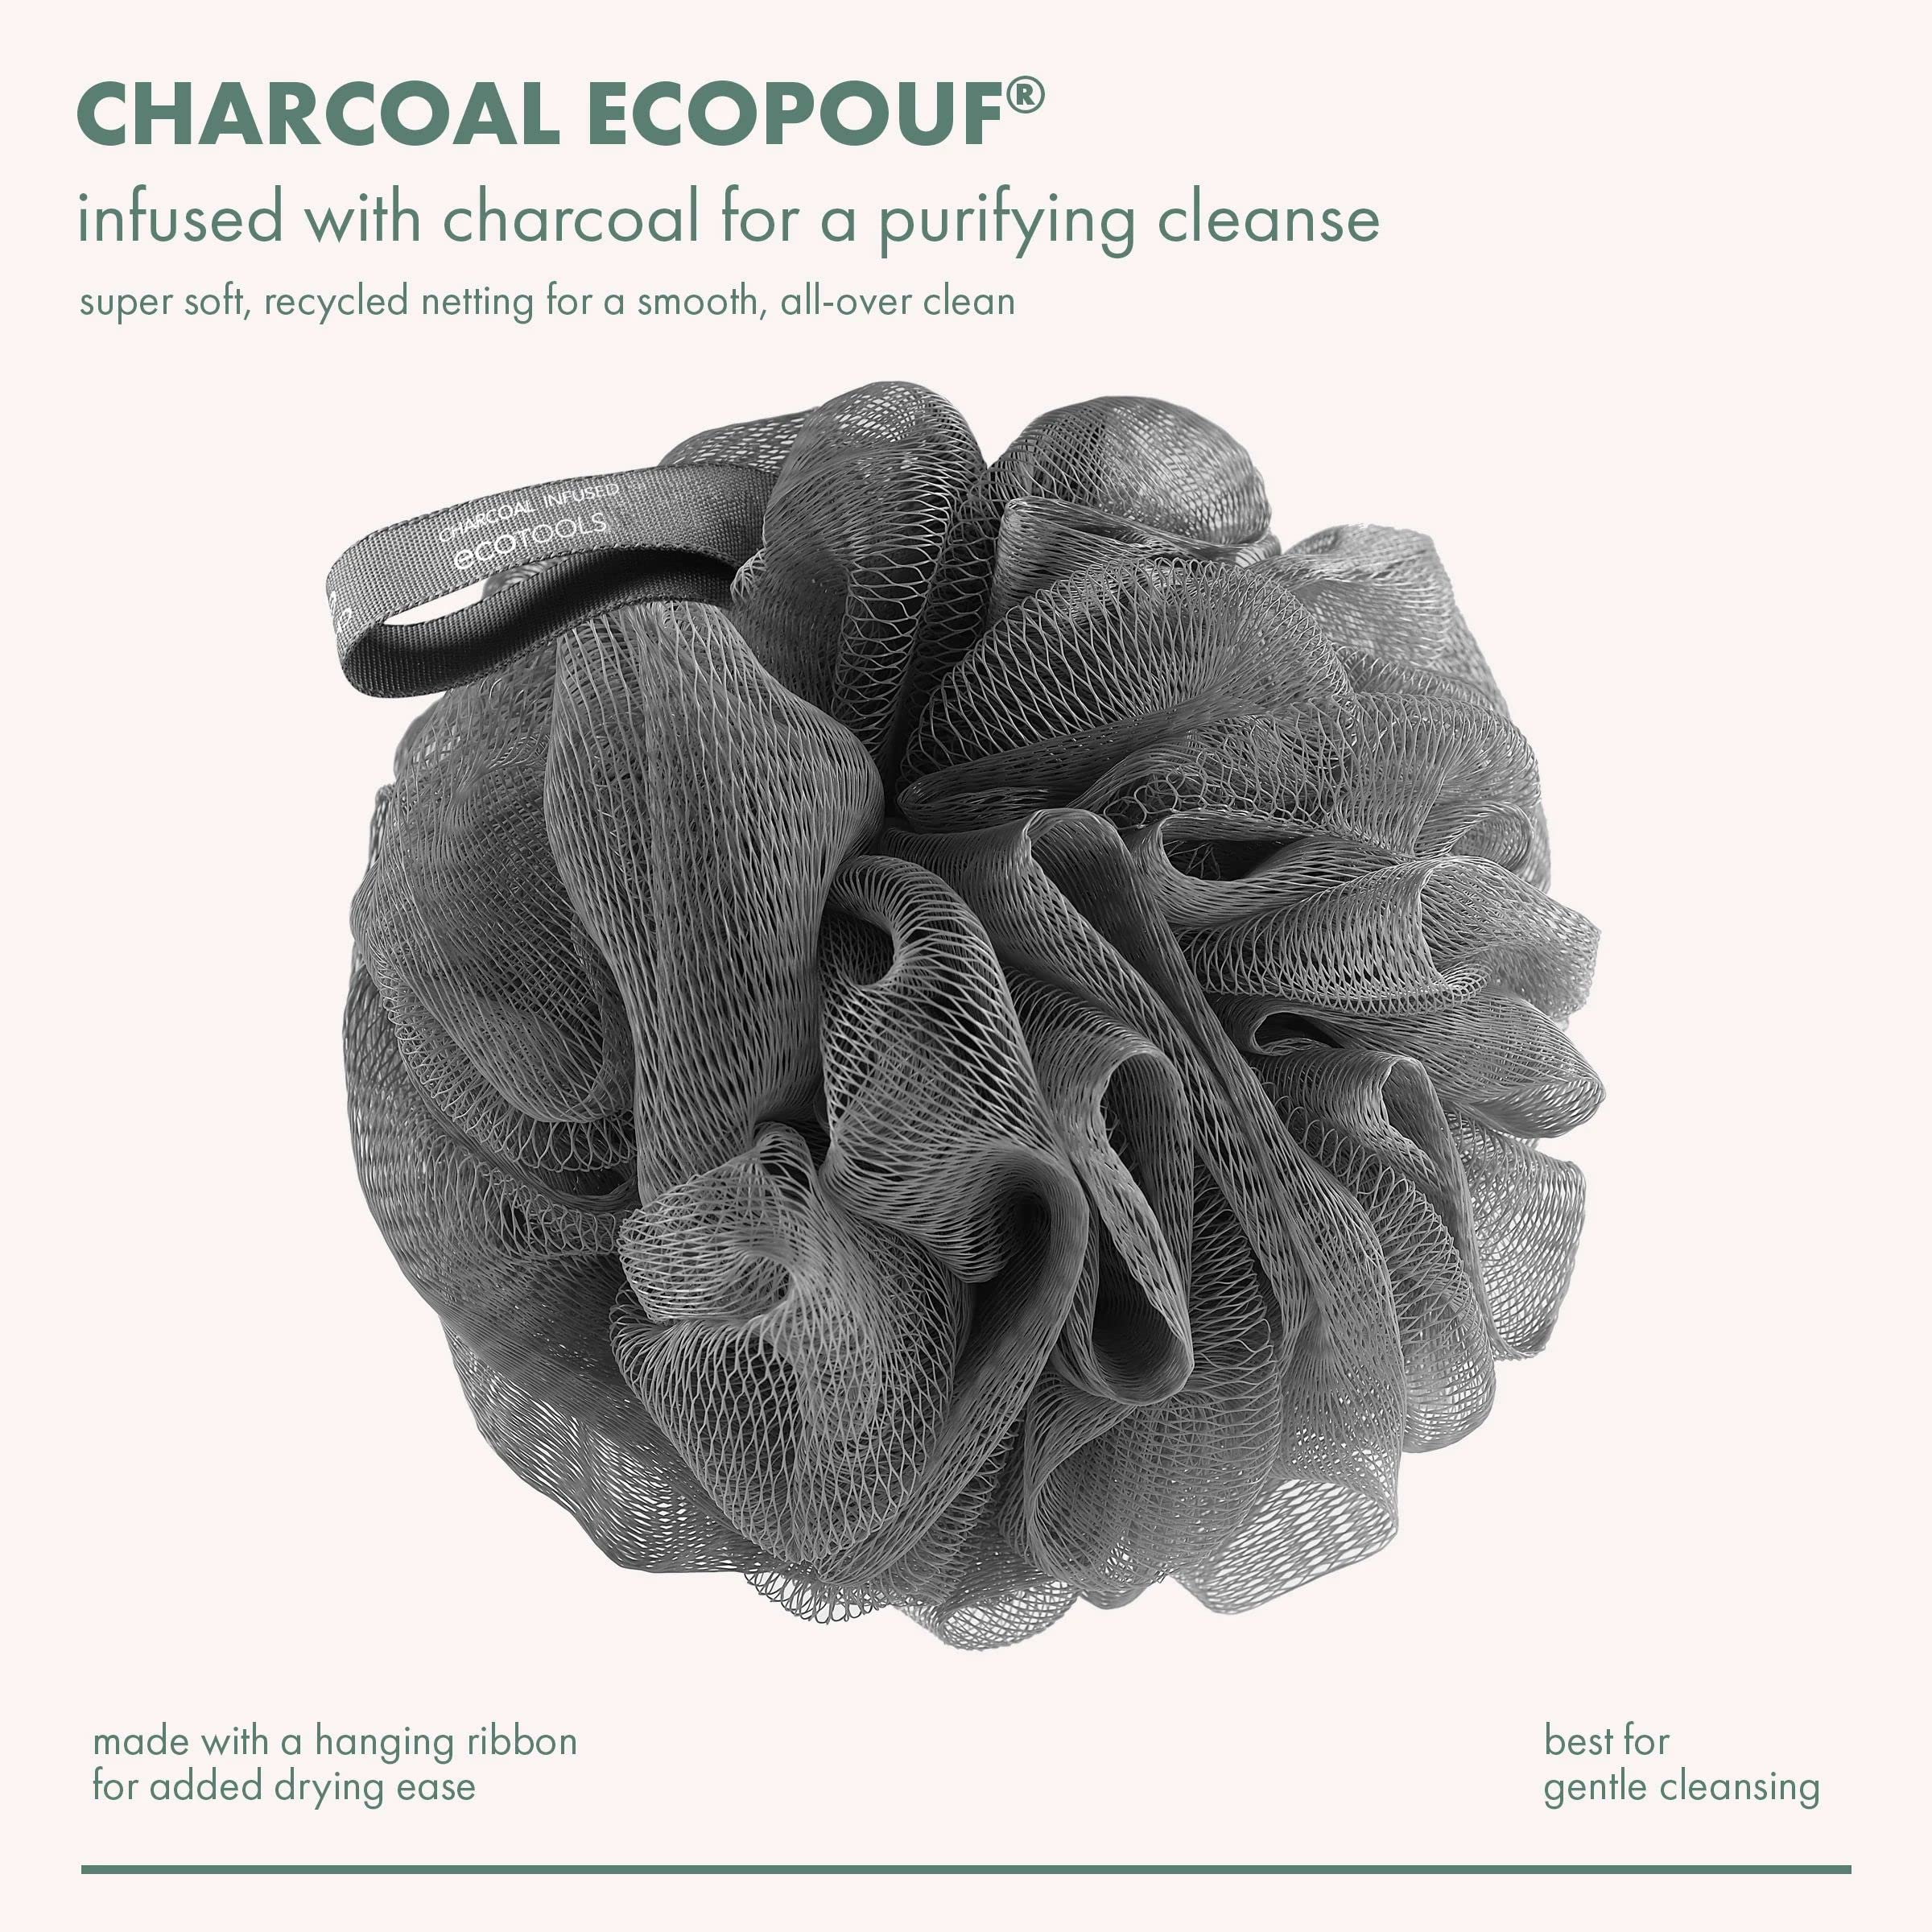 EcoTools Charcoal Infused EcoPouf, Detoxifying Mesh Bath Loofah, Gentle & Exfoliating Recycled Netting, Draws Out Dirt & Impurities, Sustainable & Eco Friendly Bath Sponge, Grey, 6 Count